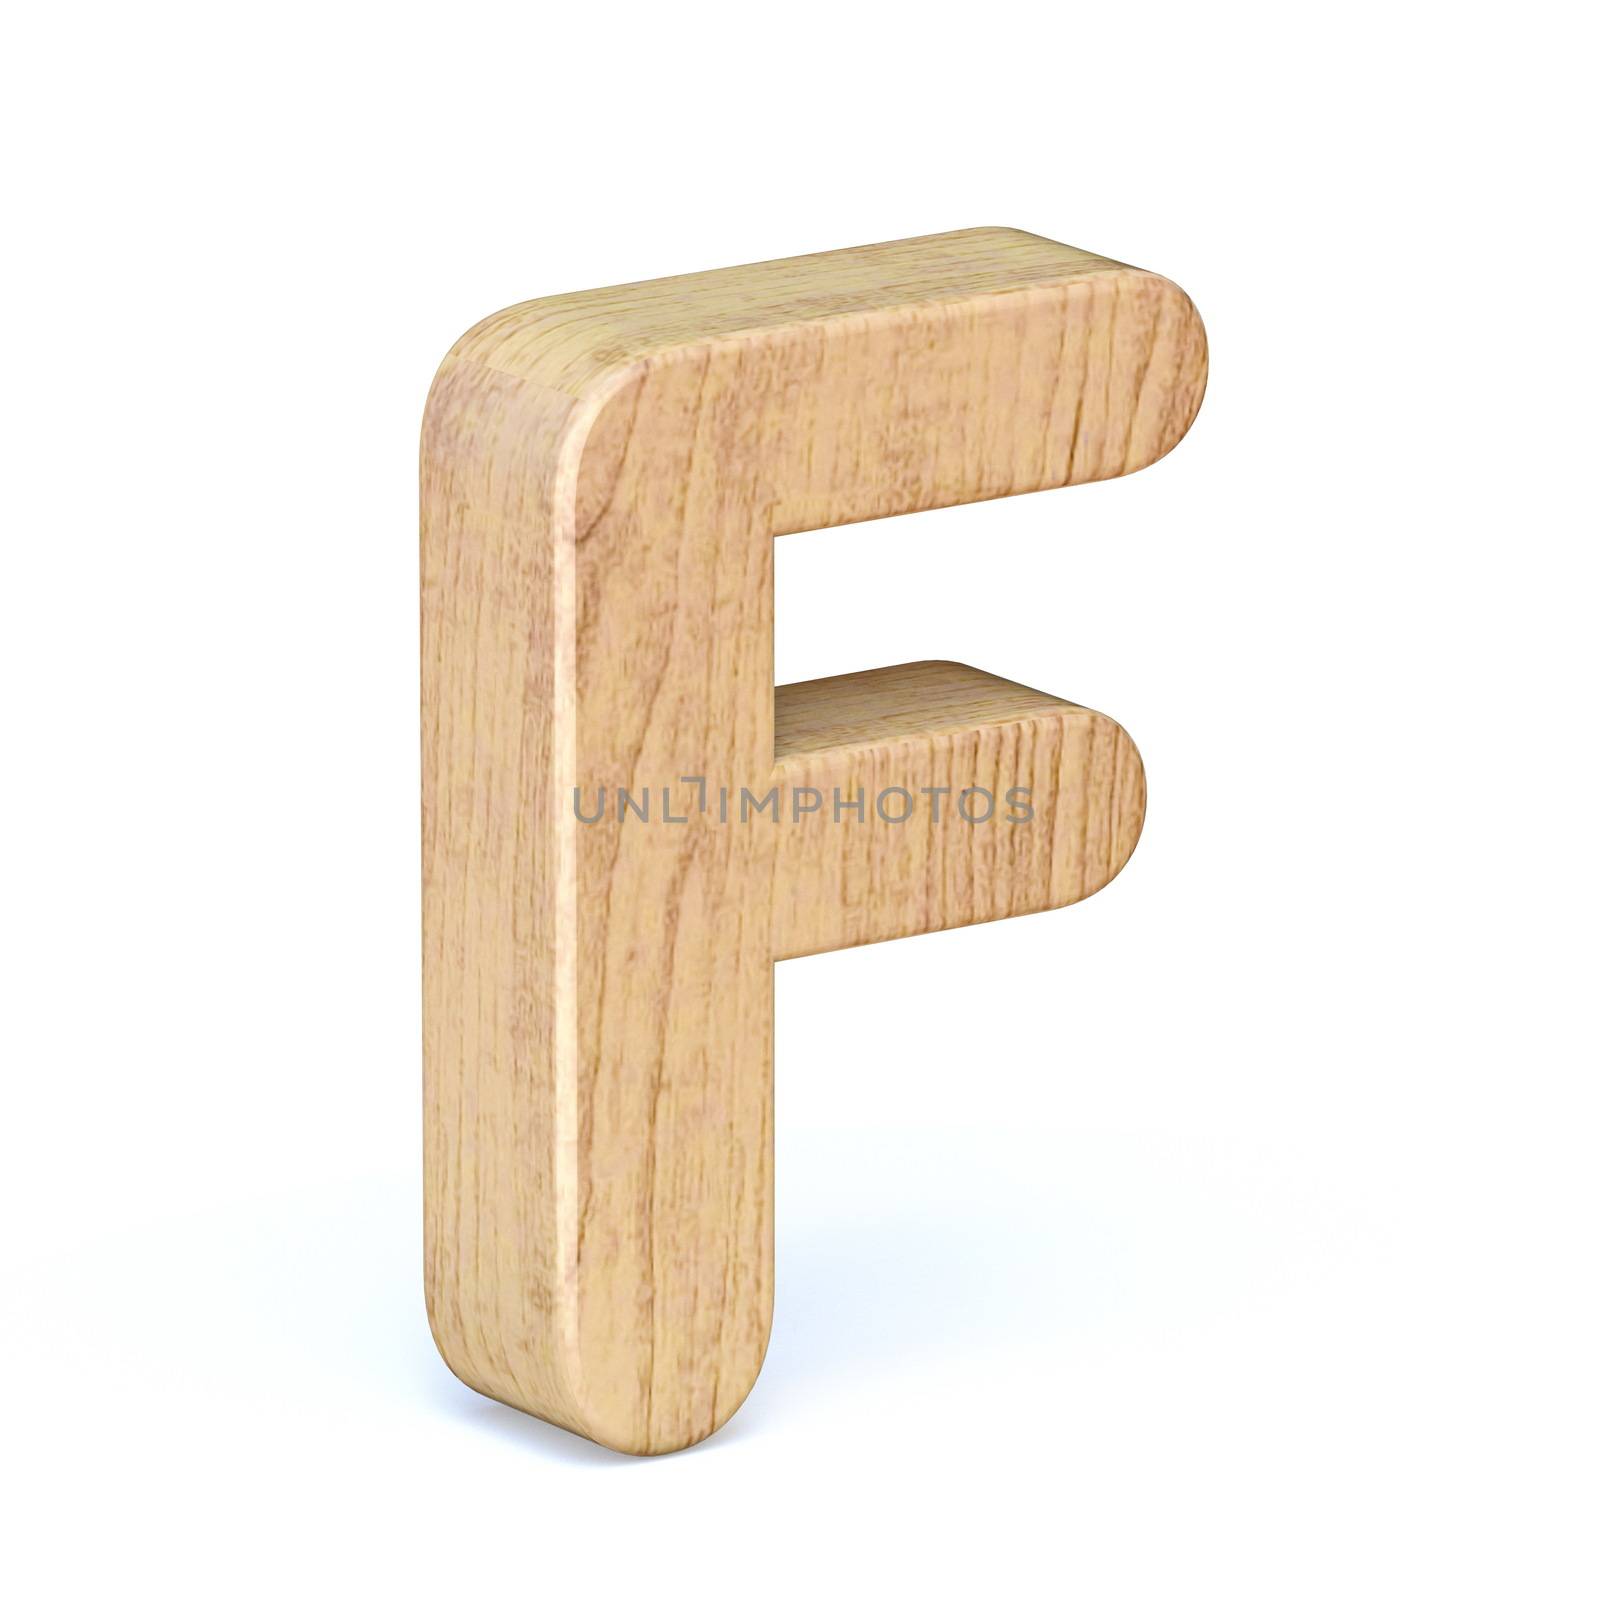 Rounded wooden font Letter F 3D by djmilic